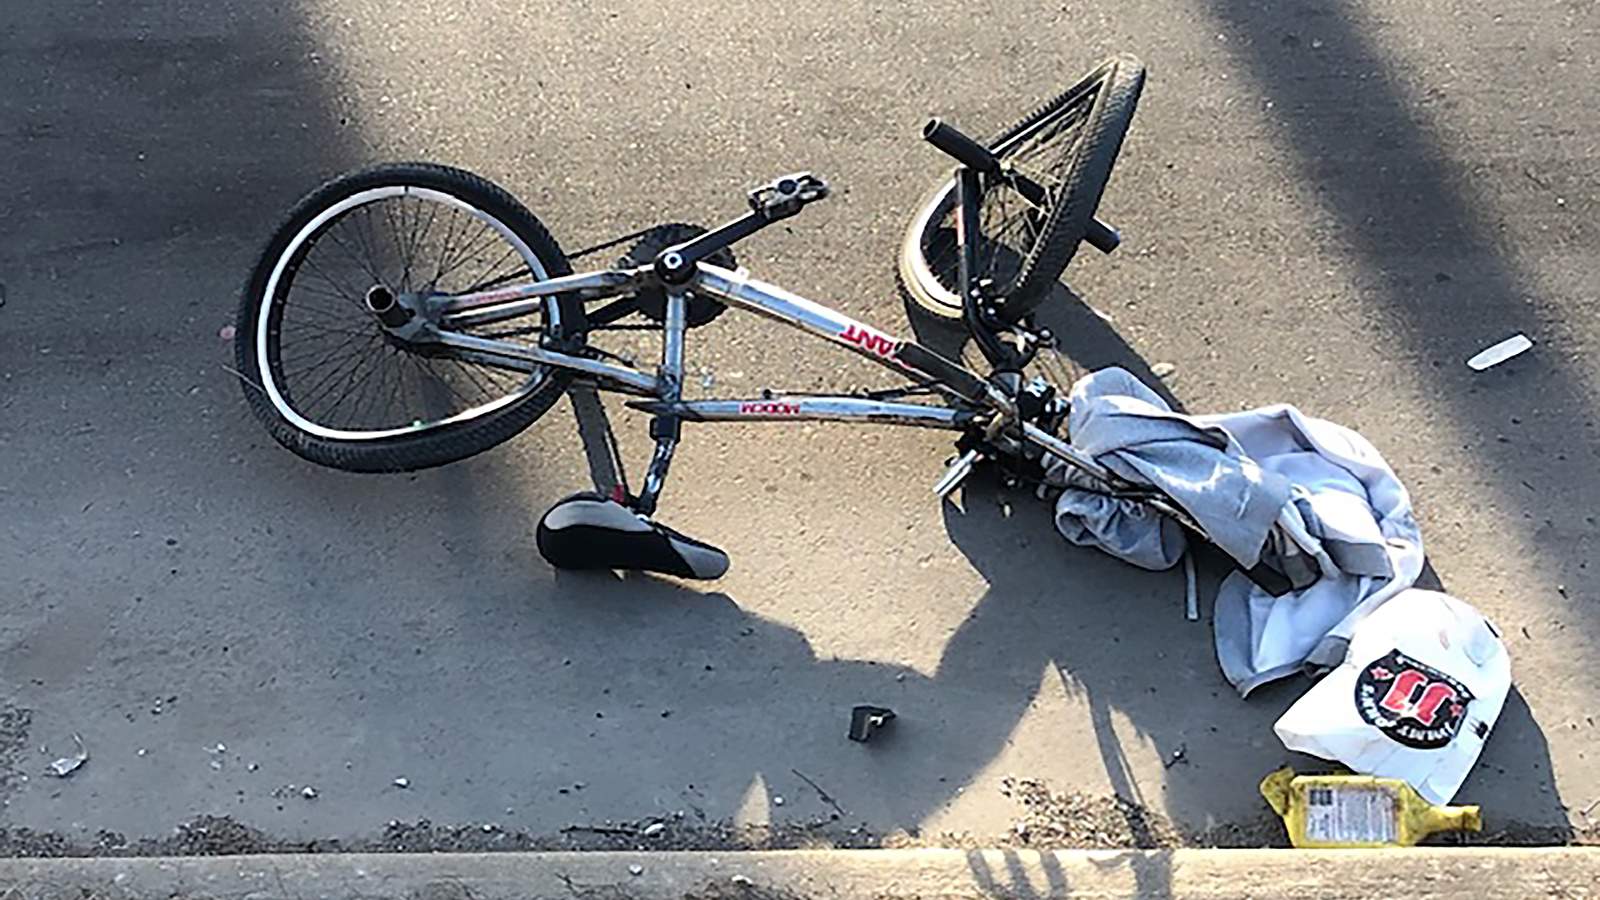 Bicyclist killed in collision on Detroit’s west side